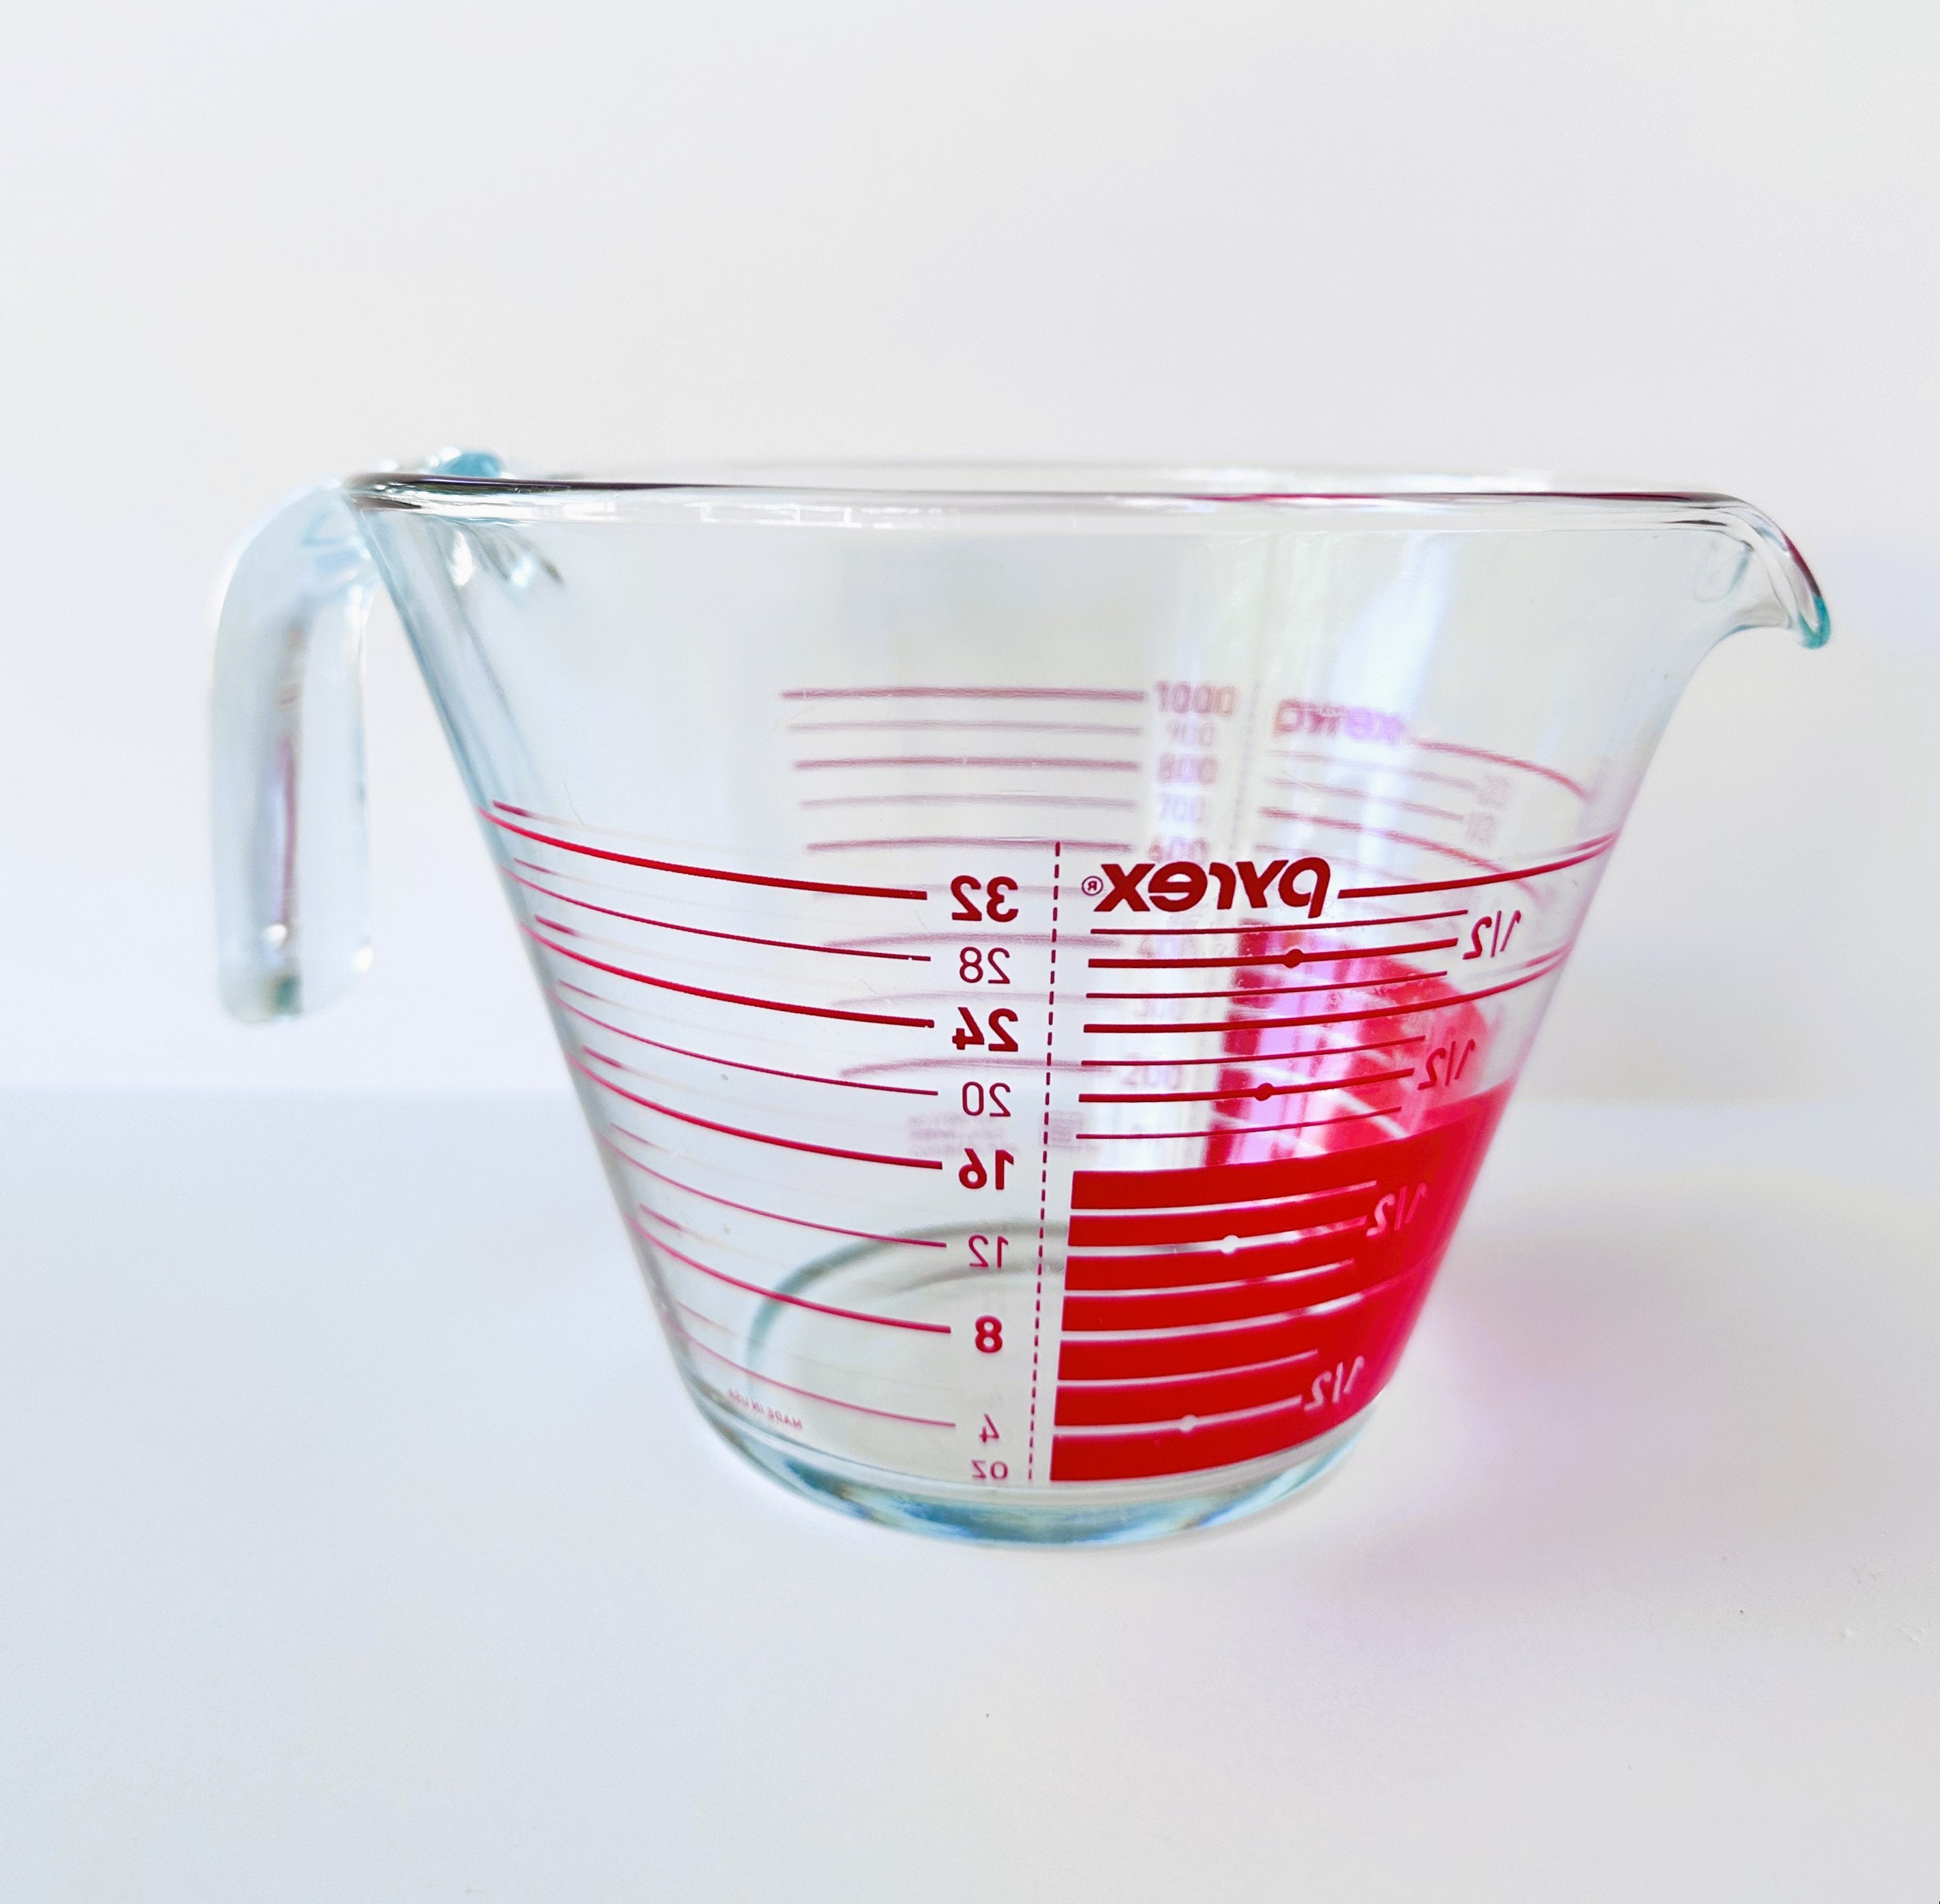 Pyrex Prepware 4 Cup Clear Glass Measuring Cup - Farr's Hardware